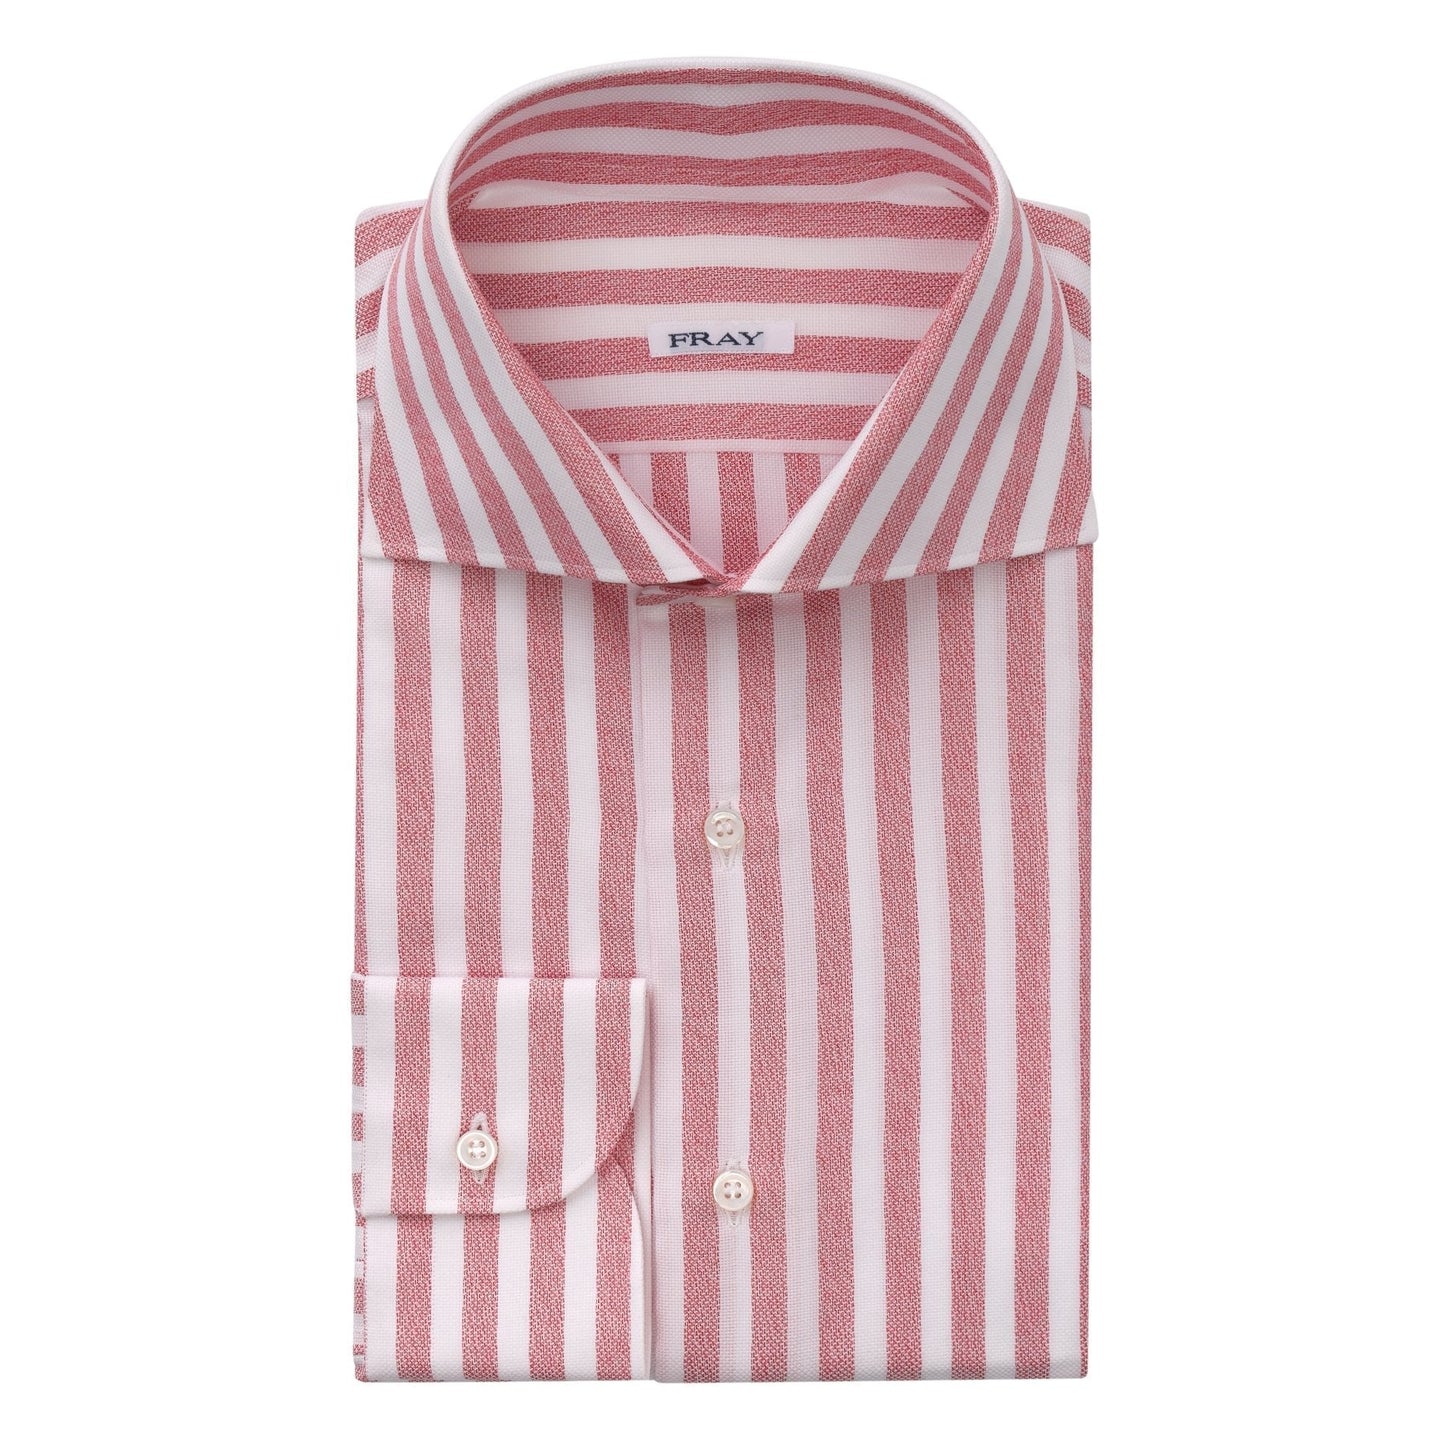 Fray Cotton Striped Shirt in White and Red - SARTALE